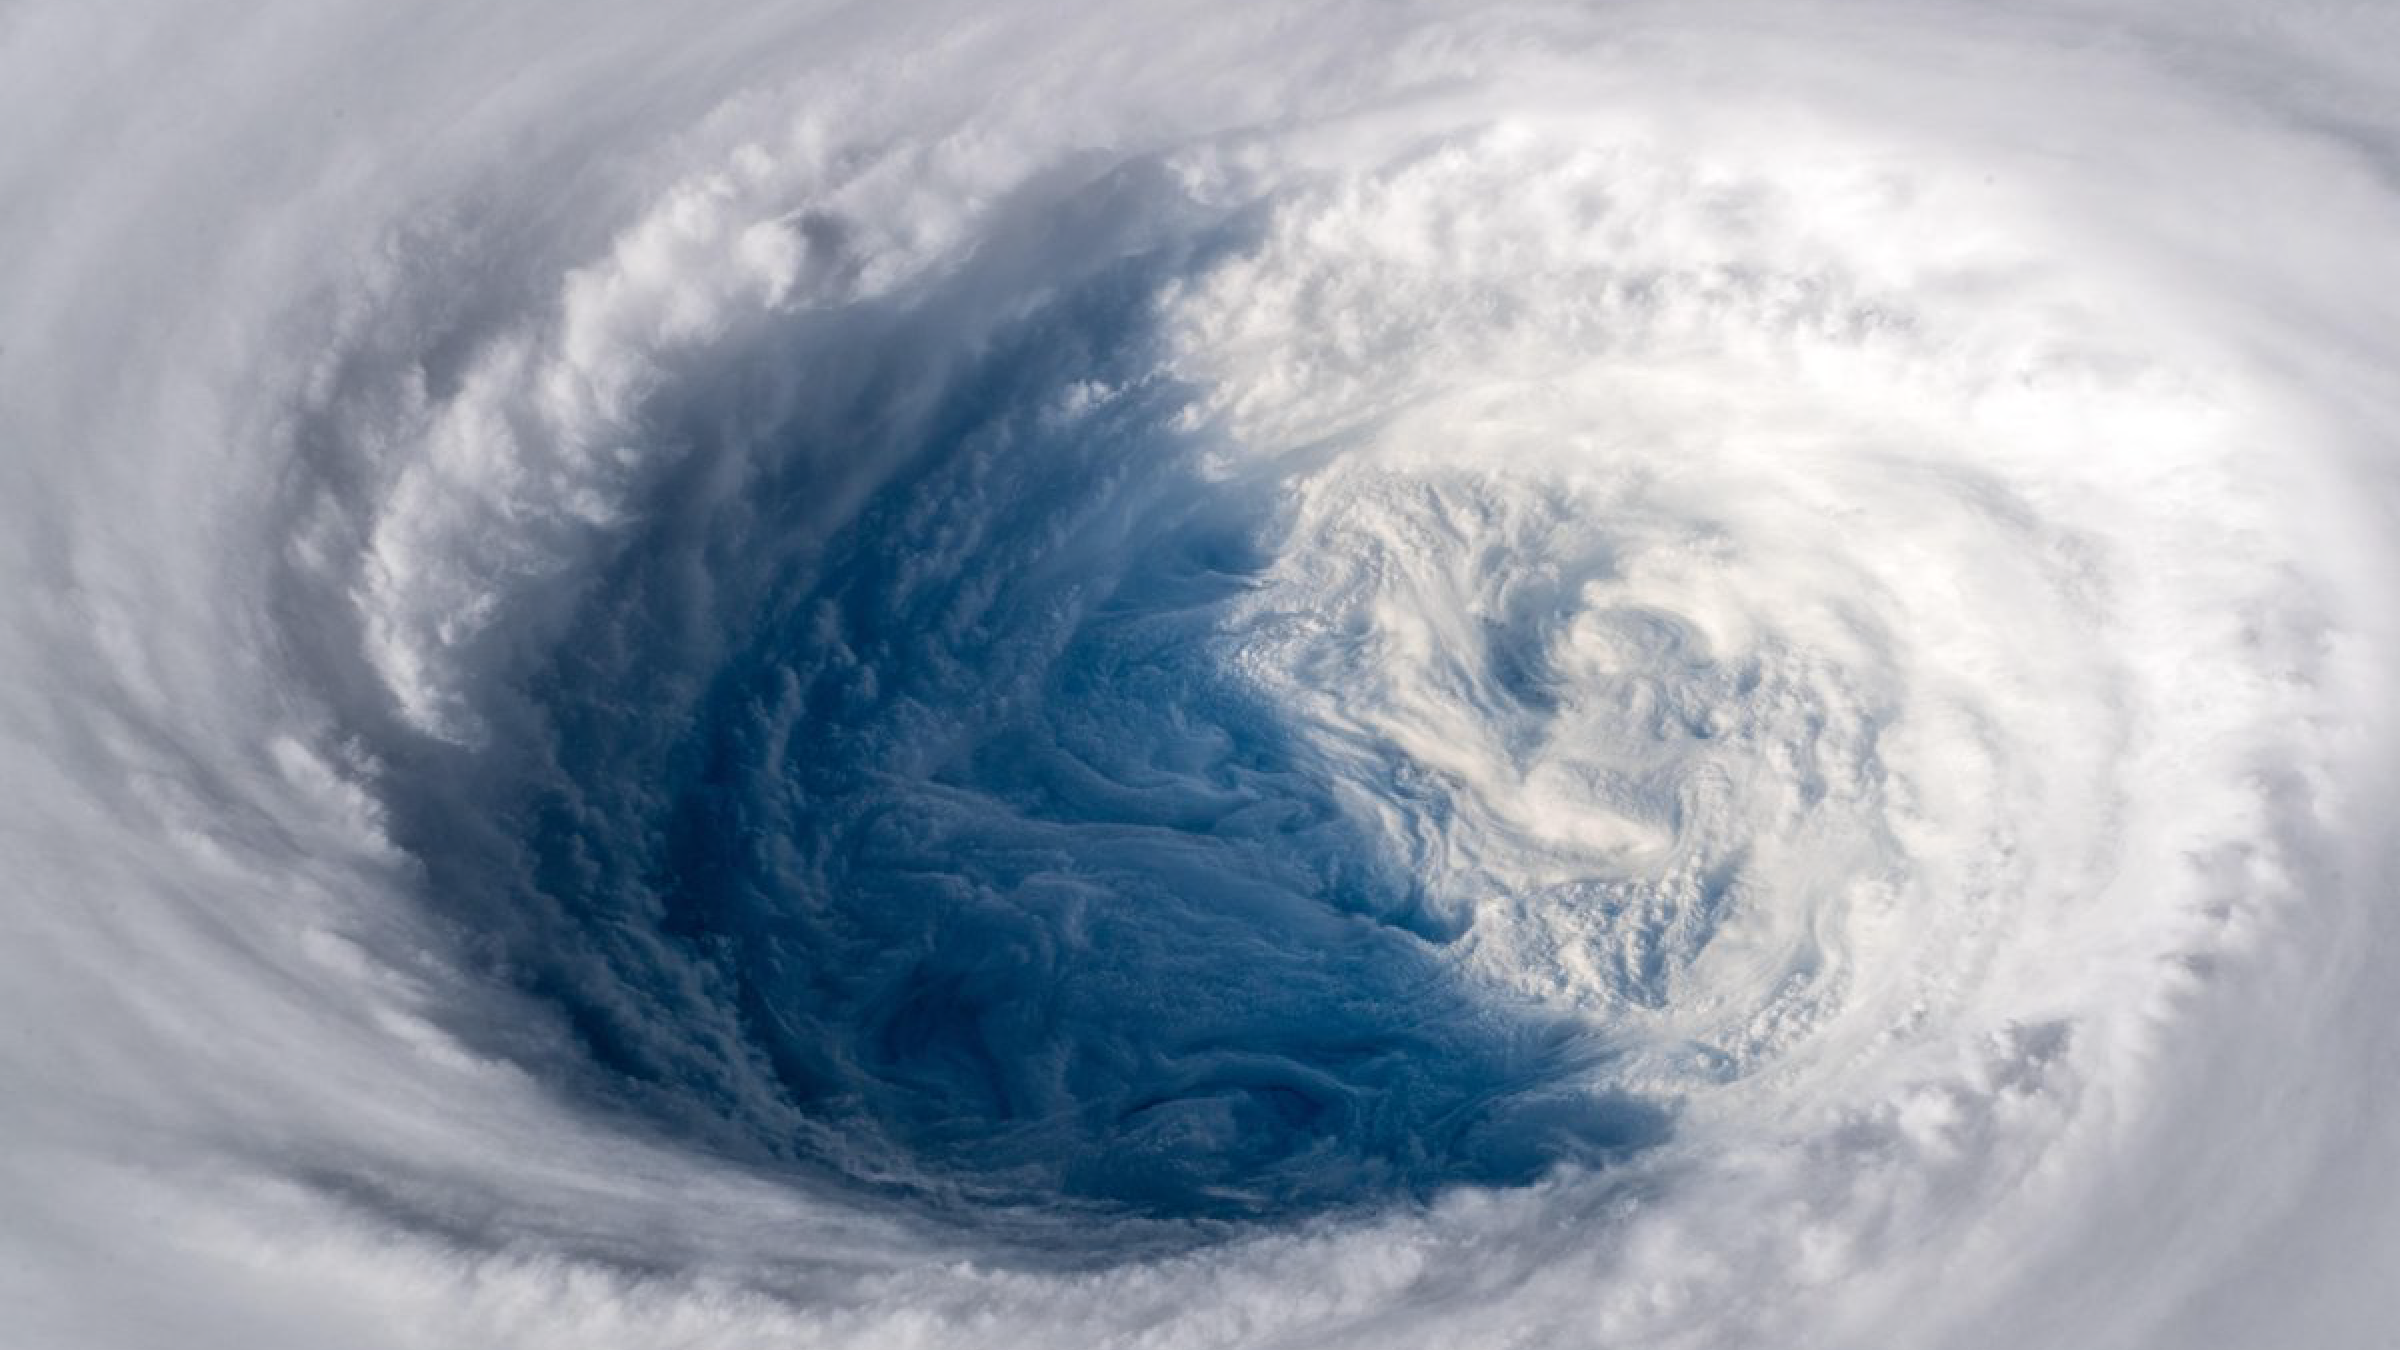 The eye of Super Typhoon Trami viewed from the International Space Station on September 25, 2018.